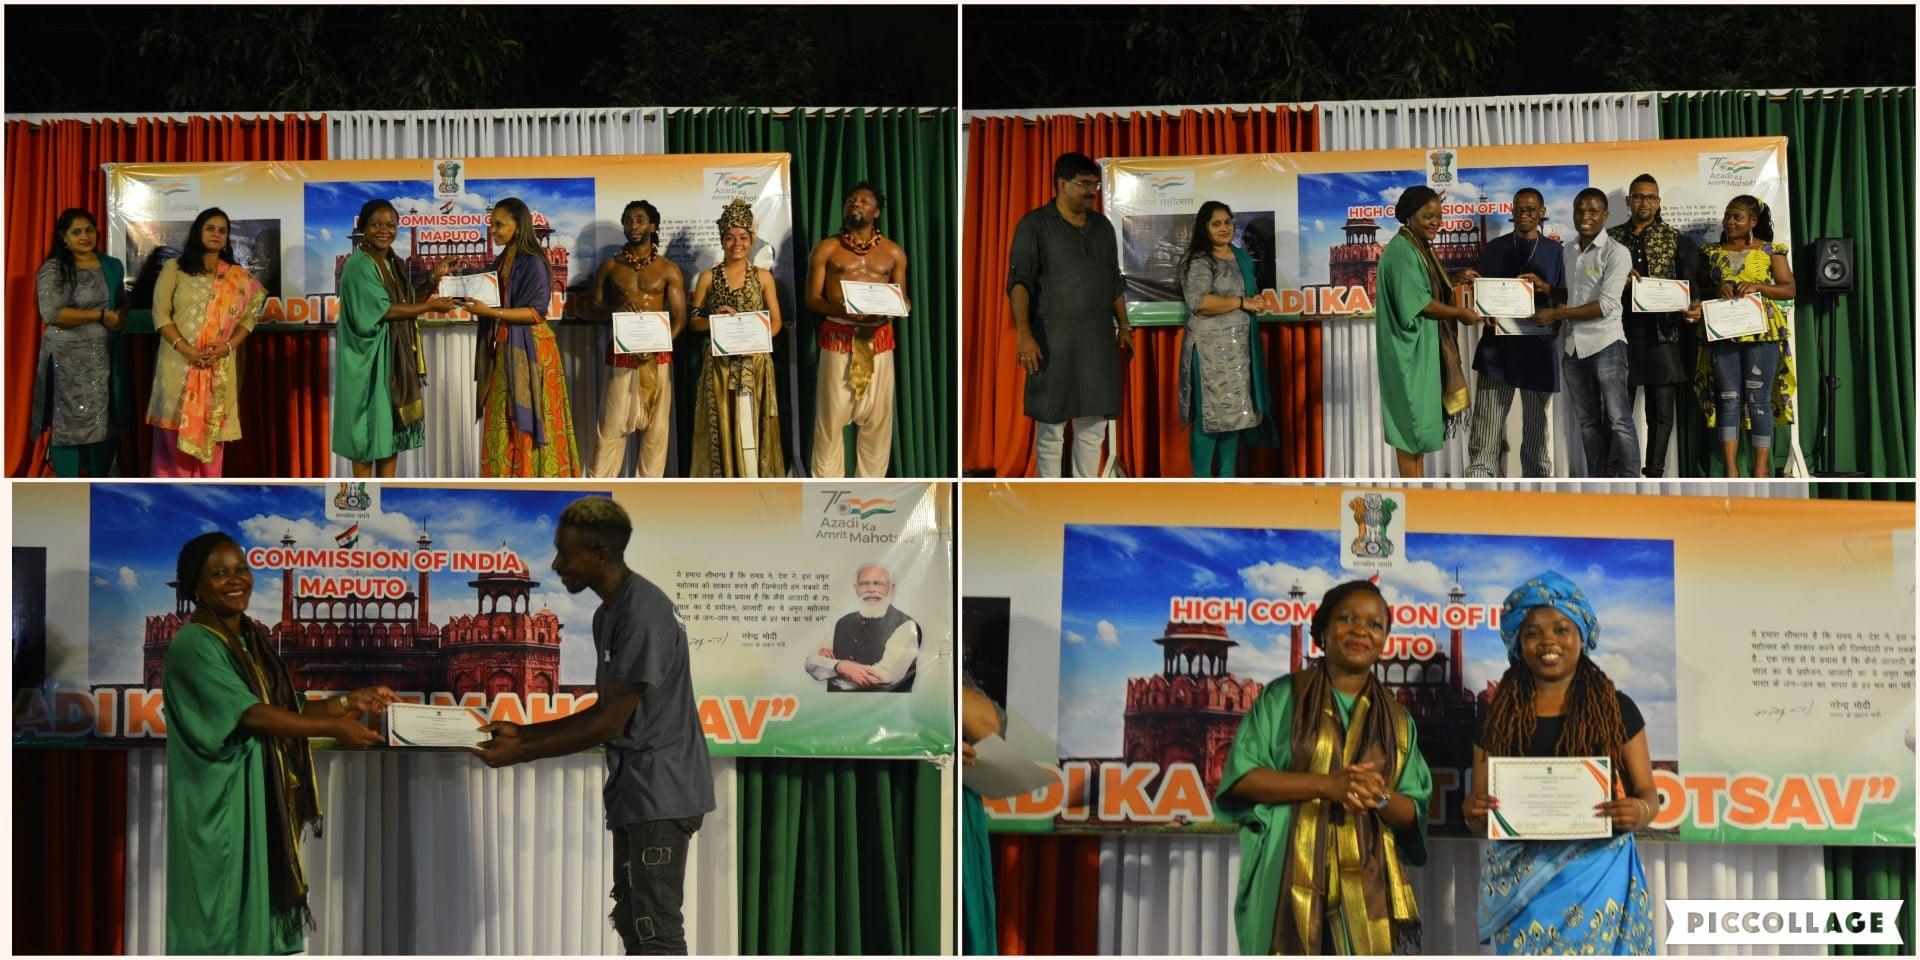 High Commission of India, Maputo commemorates Mozambique Women Day with Mozambican music & dance. High Commissioner felicitates Mozambique's Minister of Culture & Tourism, Ms. Eldevina Materula ( Chief Guest), Ms. Cidalia Oliveira & Ms. Eliza Samuel for their extraordinary accomplishments